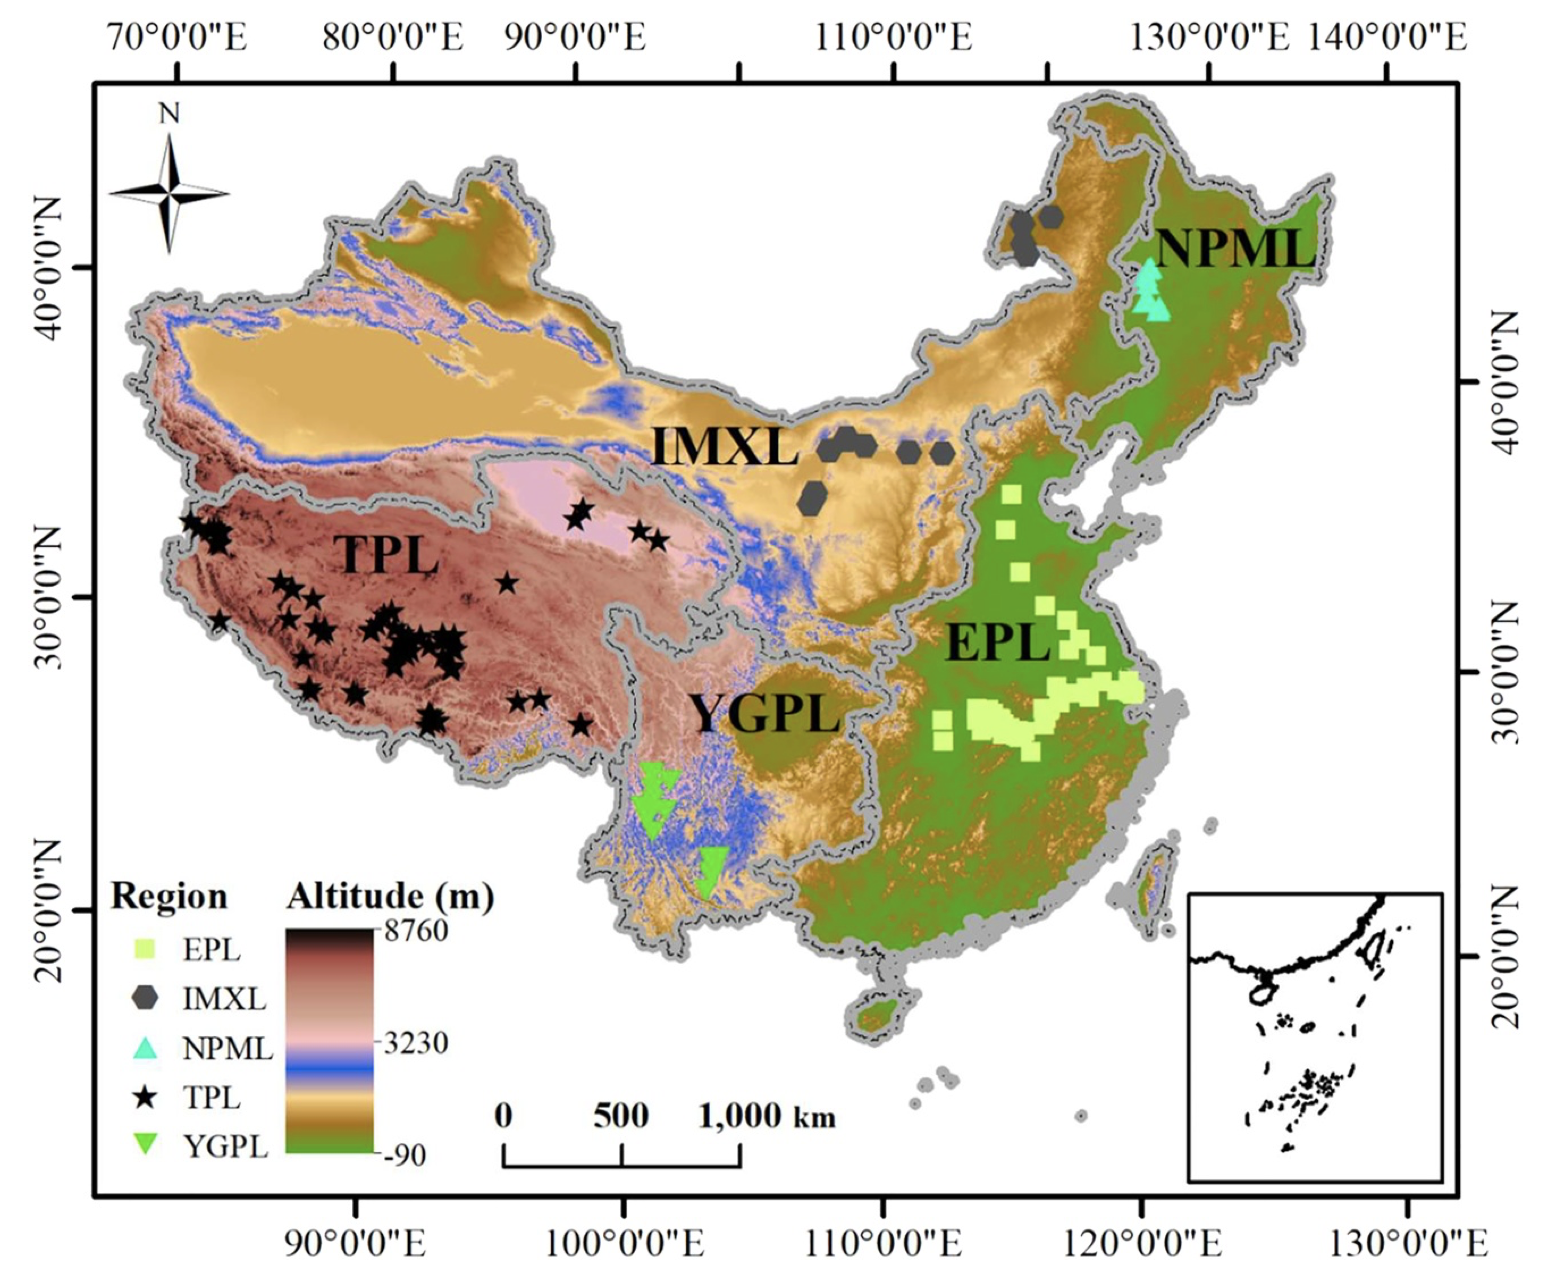 A map of china is shown. Colors across the map indicate the altitude from -90 meters to 8760 meters. The country is divided into five lake zones. E.P.L. is the eastern plain lake zone. I.M.X.L is the Inner Mongolia-Xinjiang or northwestern lake zone. N.P.M.L. is the northeastern plain and mountain lake zone. T.P.L. is the Tibetan Plateau lake zone. Y.G.PL. is the Yunnan-Guizhou or southwestern plateau lake zone. Symbols for sampling sites are different in each region.